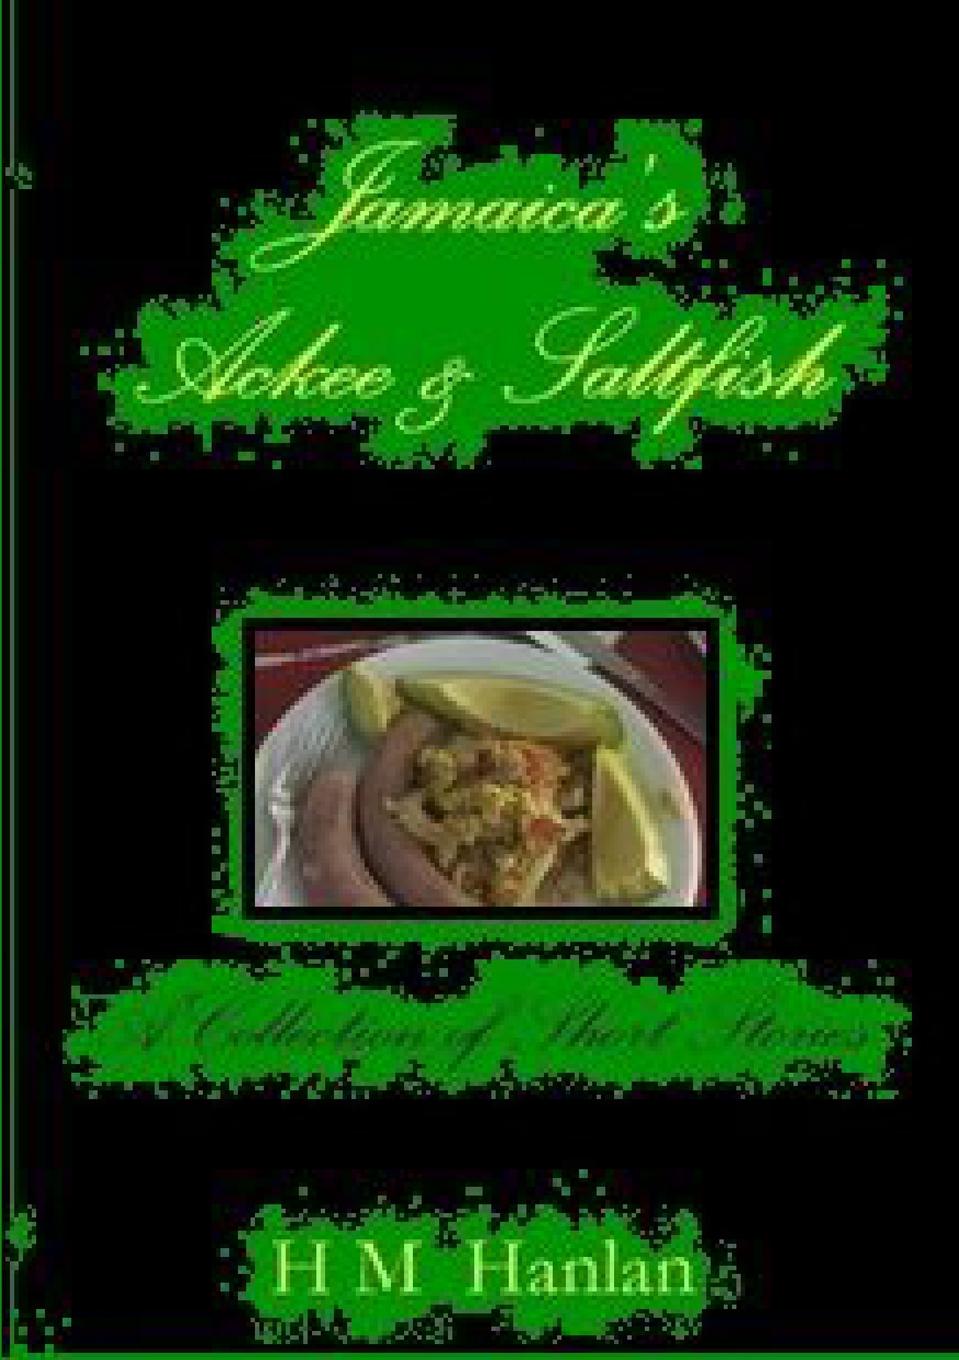 H M Hanlan Jamaica.s Ackee . Saltfish A Collection of Short Stories